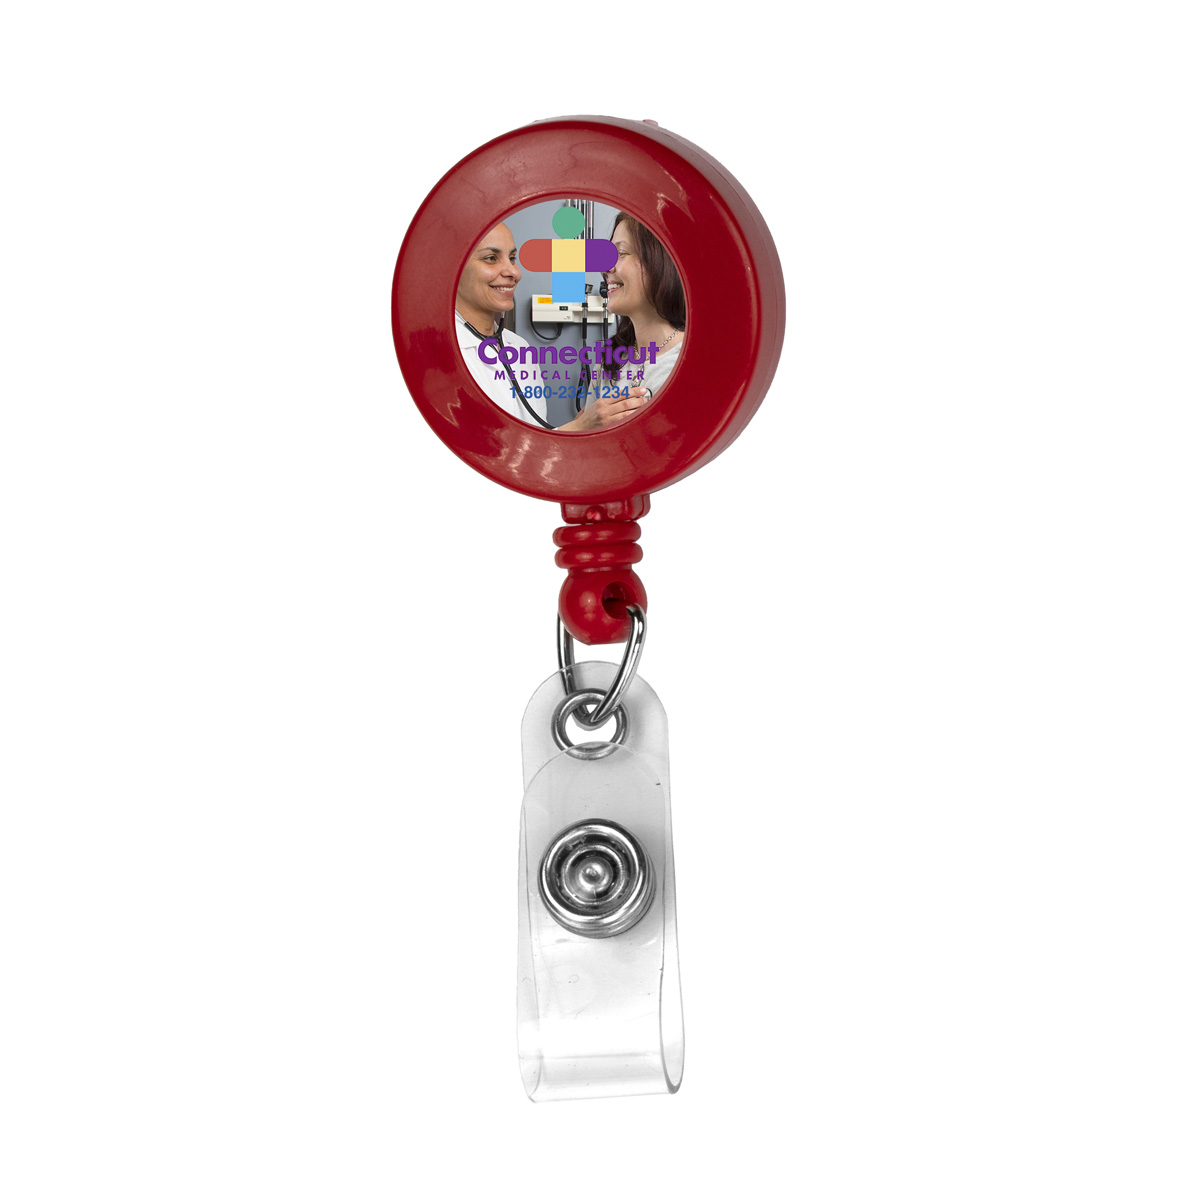 BELLEFONTAINE VL 30 Cord Round Retractable Badge Reel and Badge